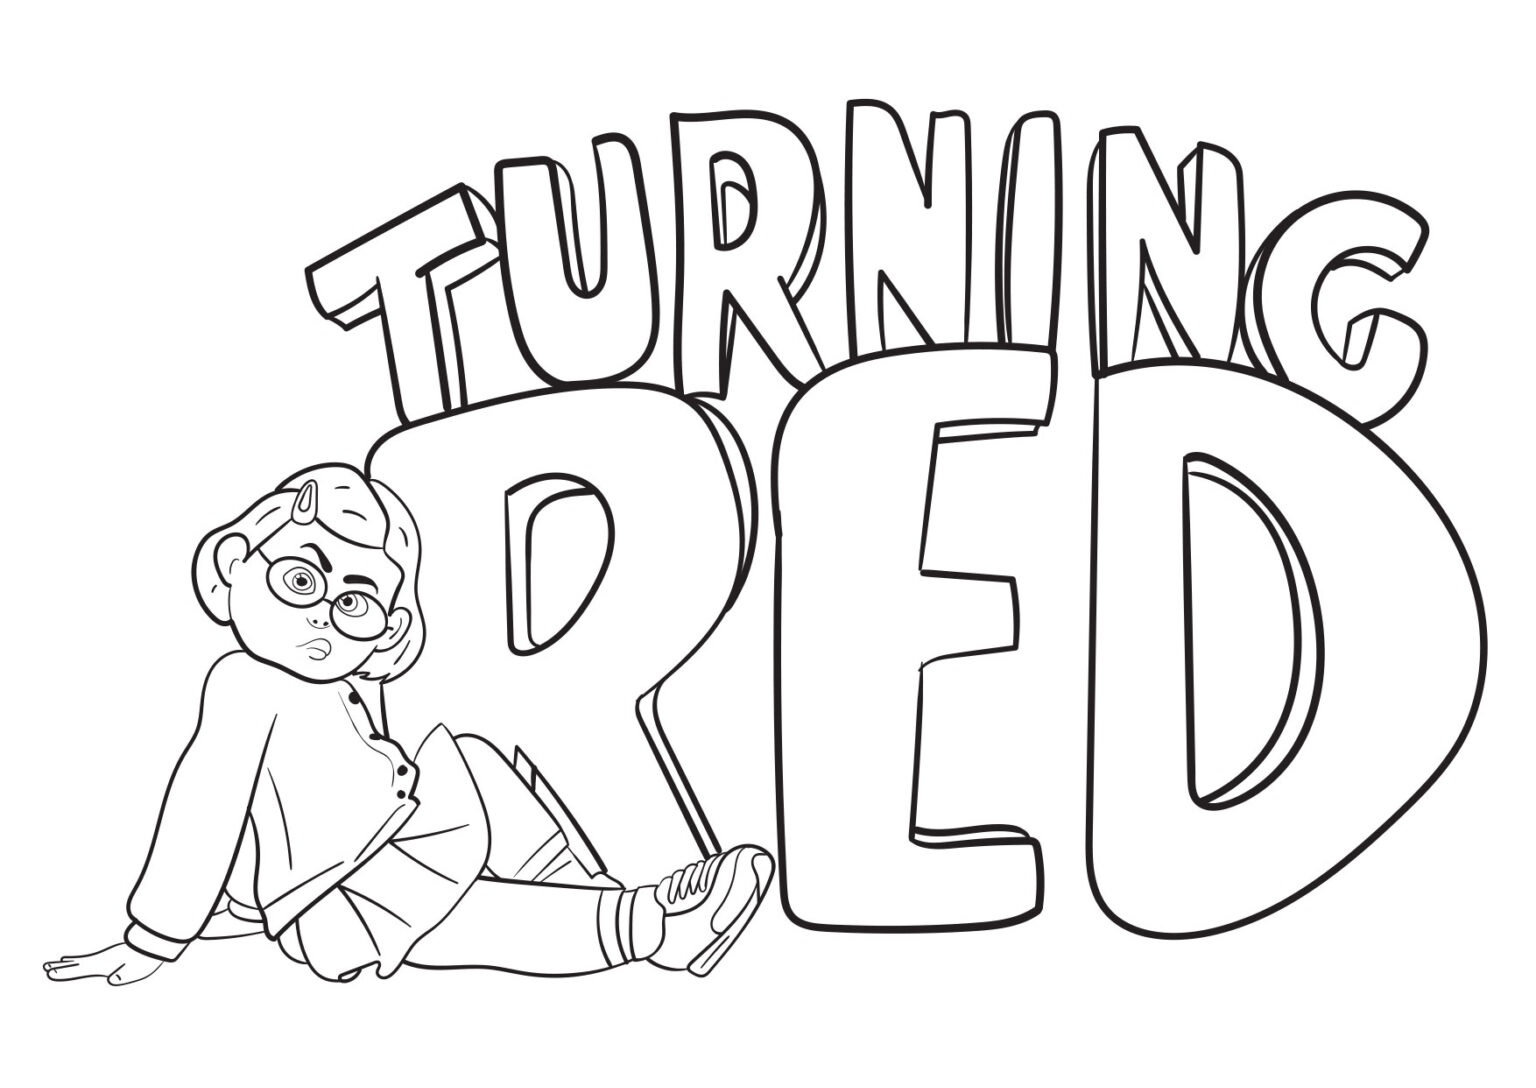 Turning Red Coloring Pages - coloring pages turning red